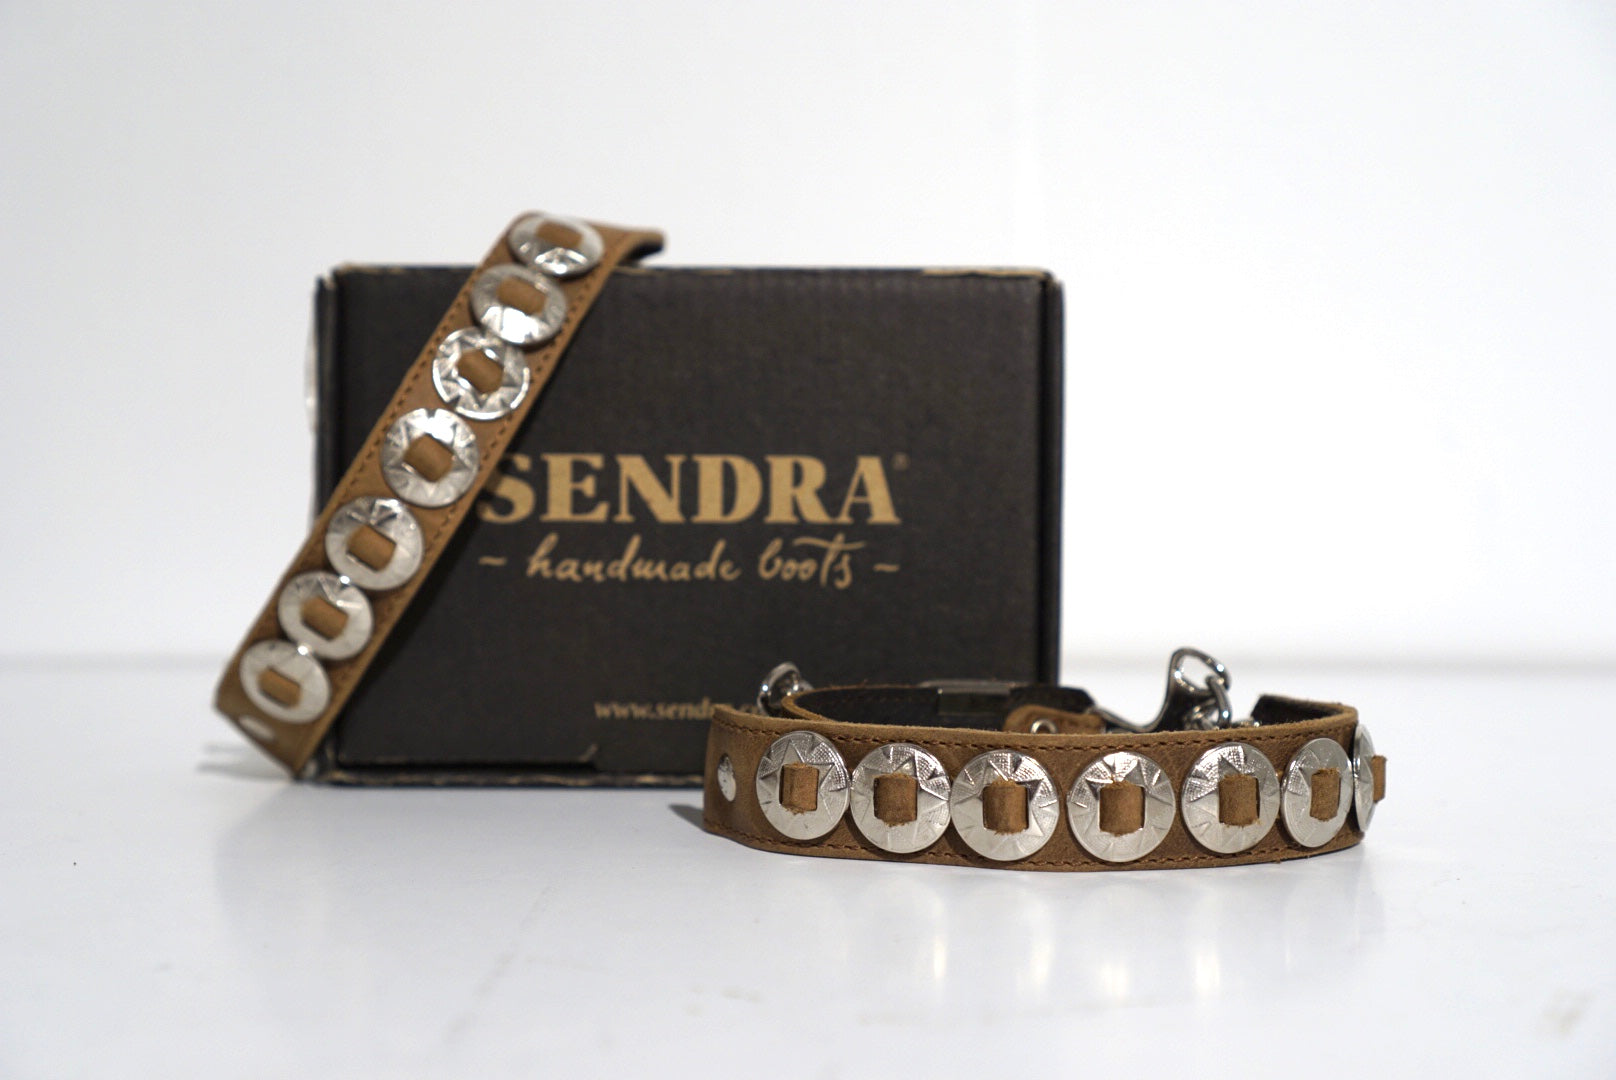 Sendra spores - light brown with silver circles/stars